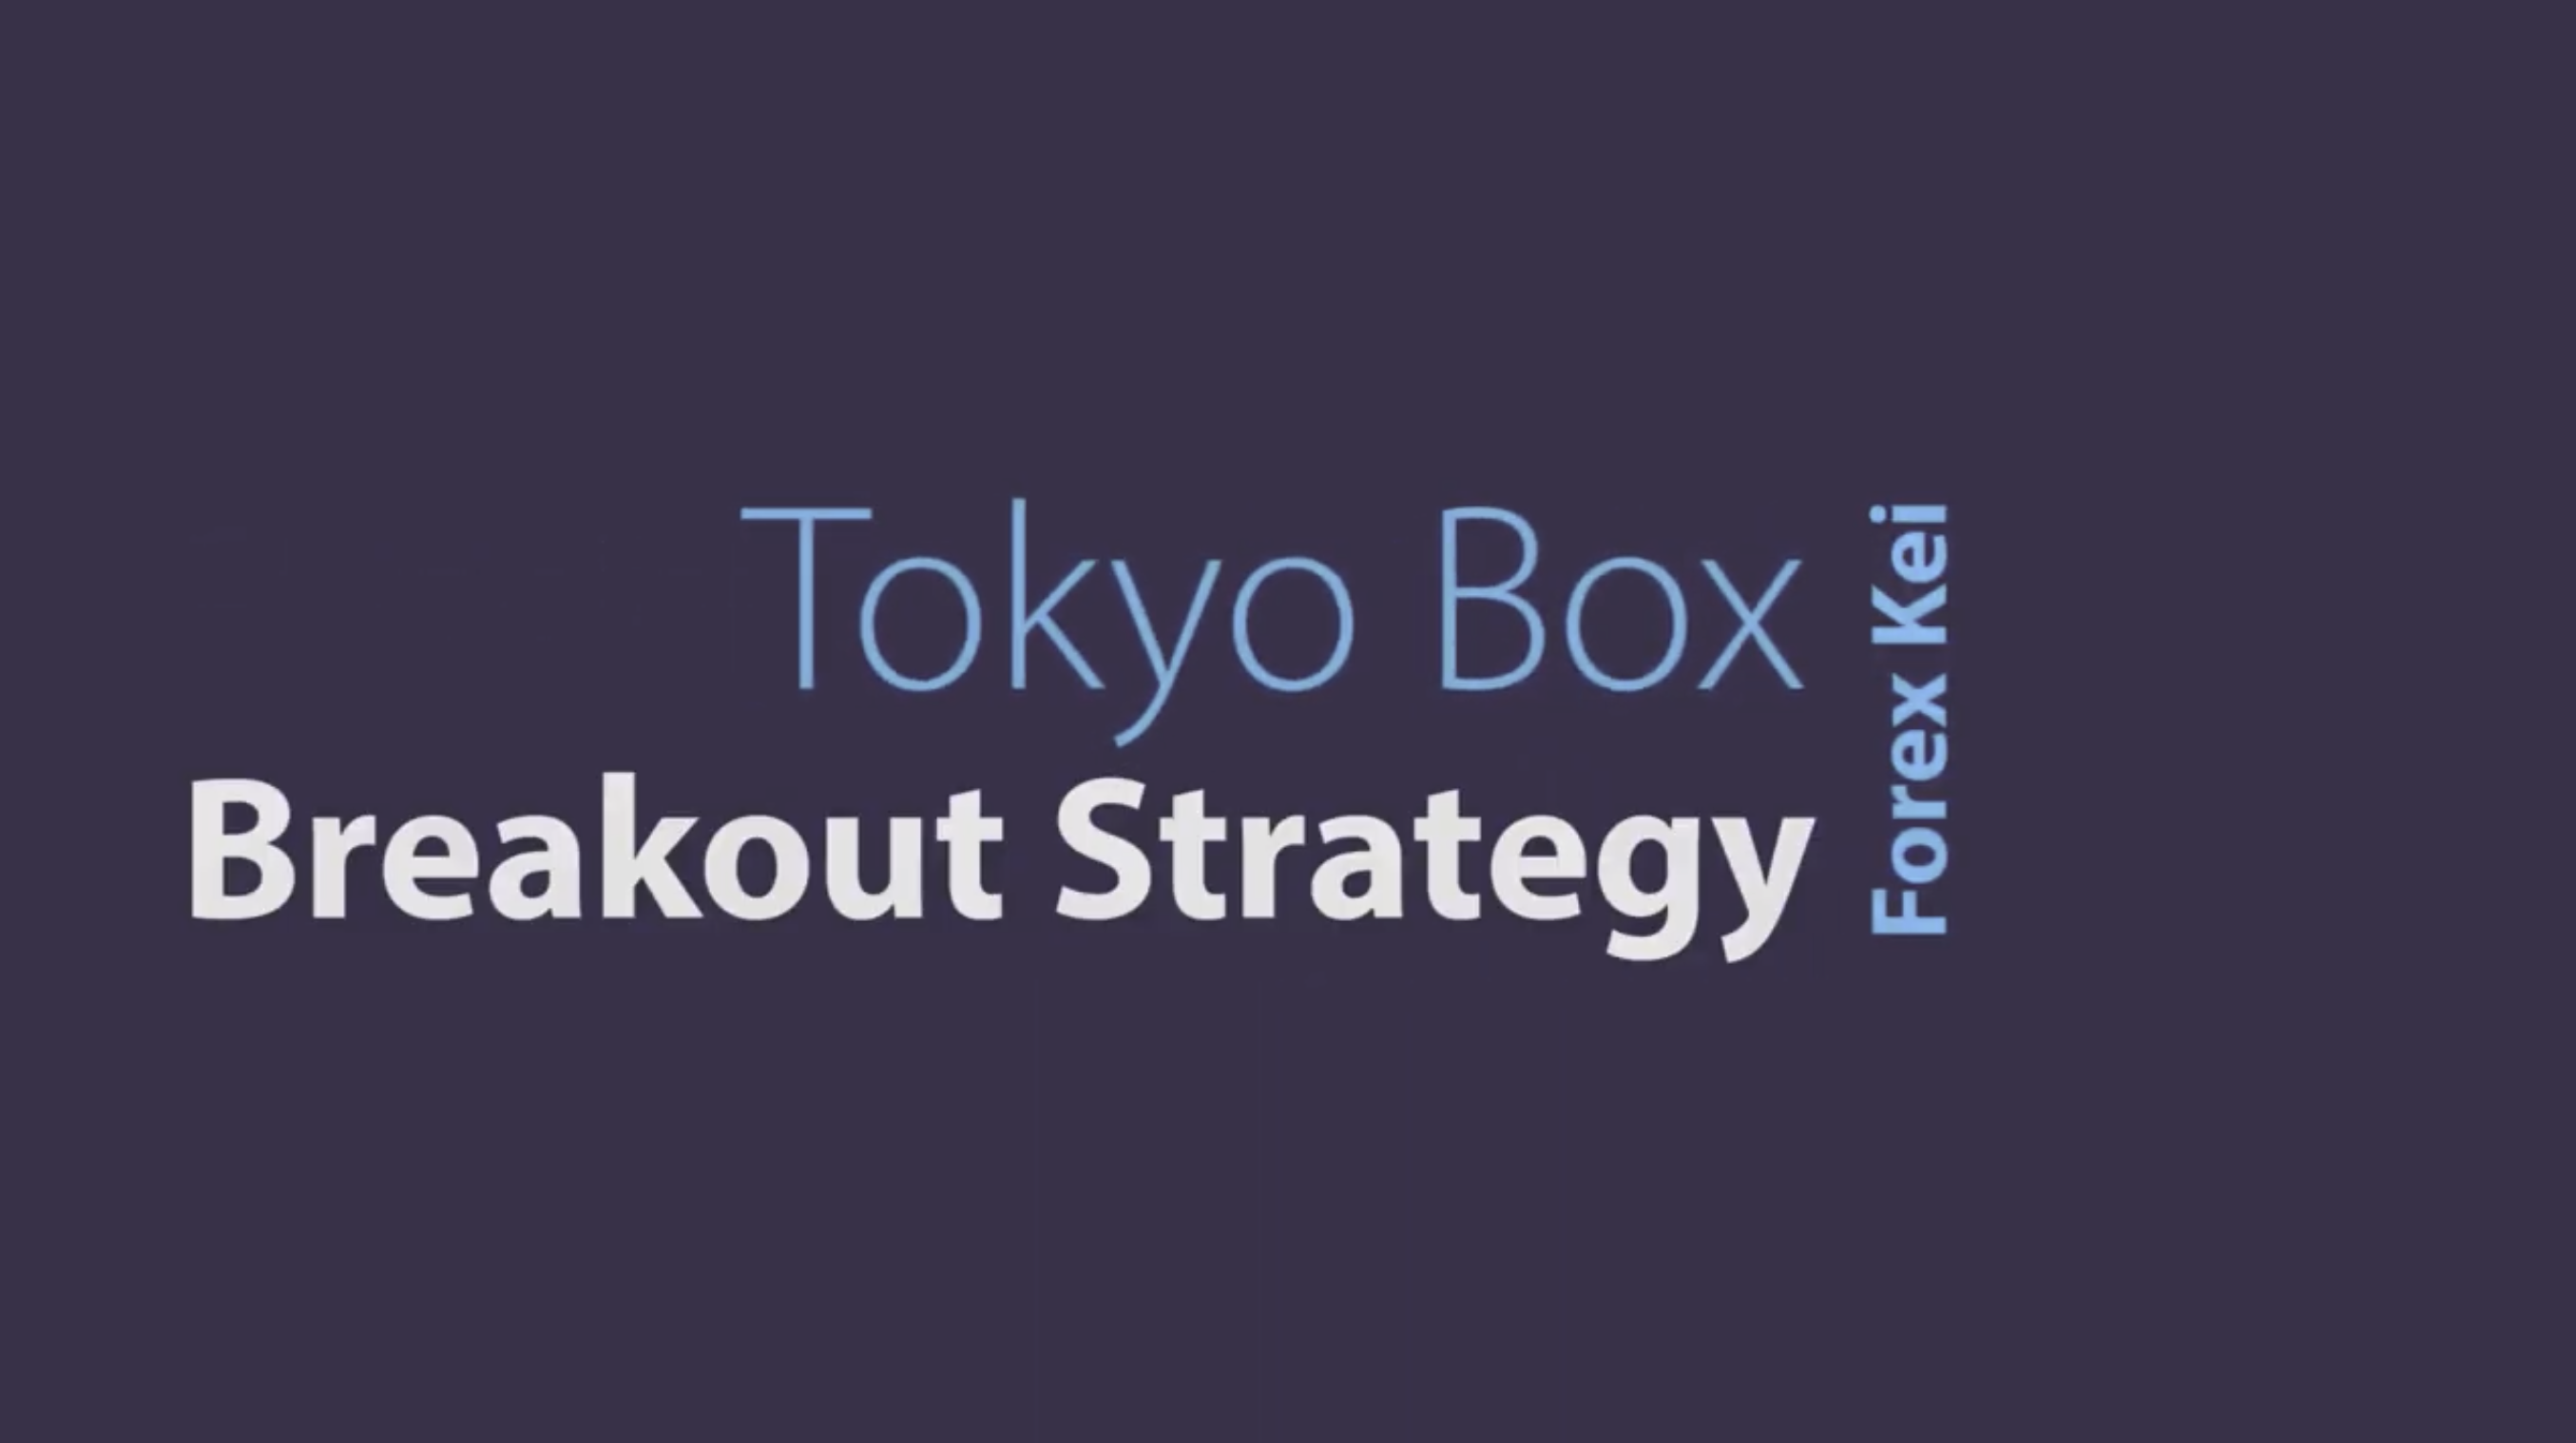 Tokyo Box Breakout Strategy with 3 simple steps